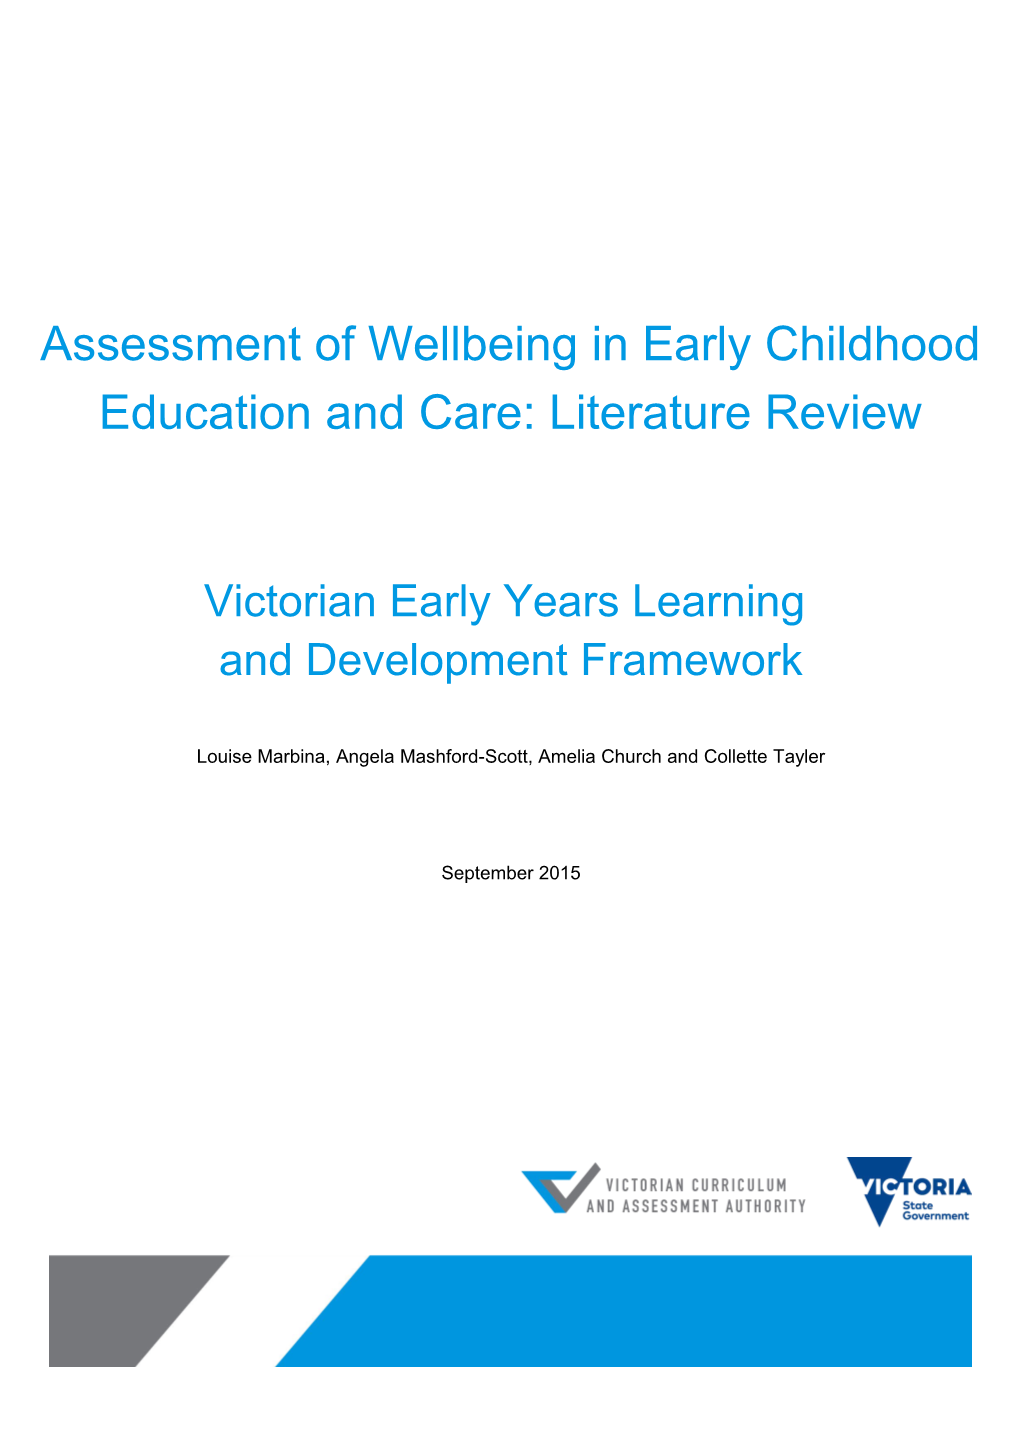 Assessment of Wellbeing in Early Childhood Education and Care: Literature Review